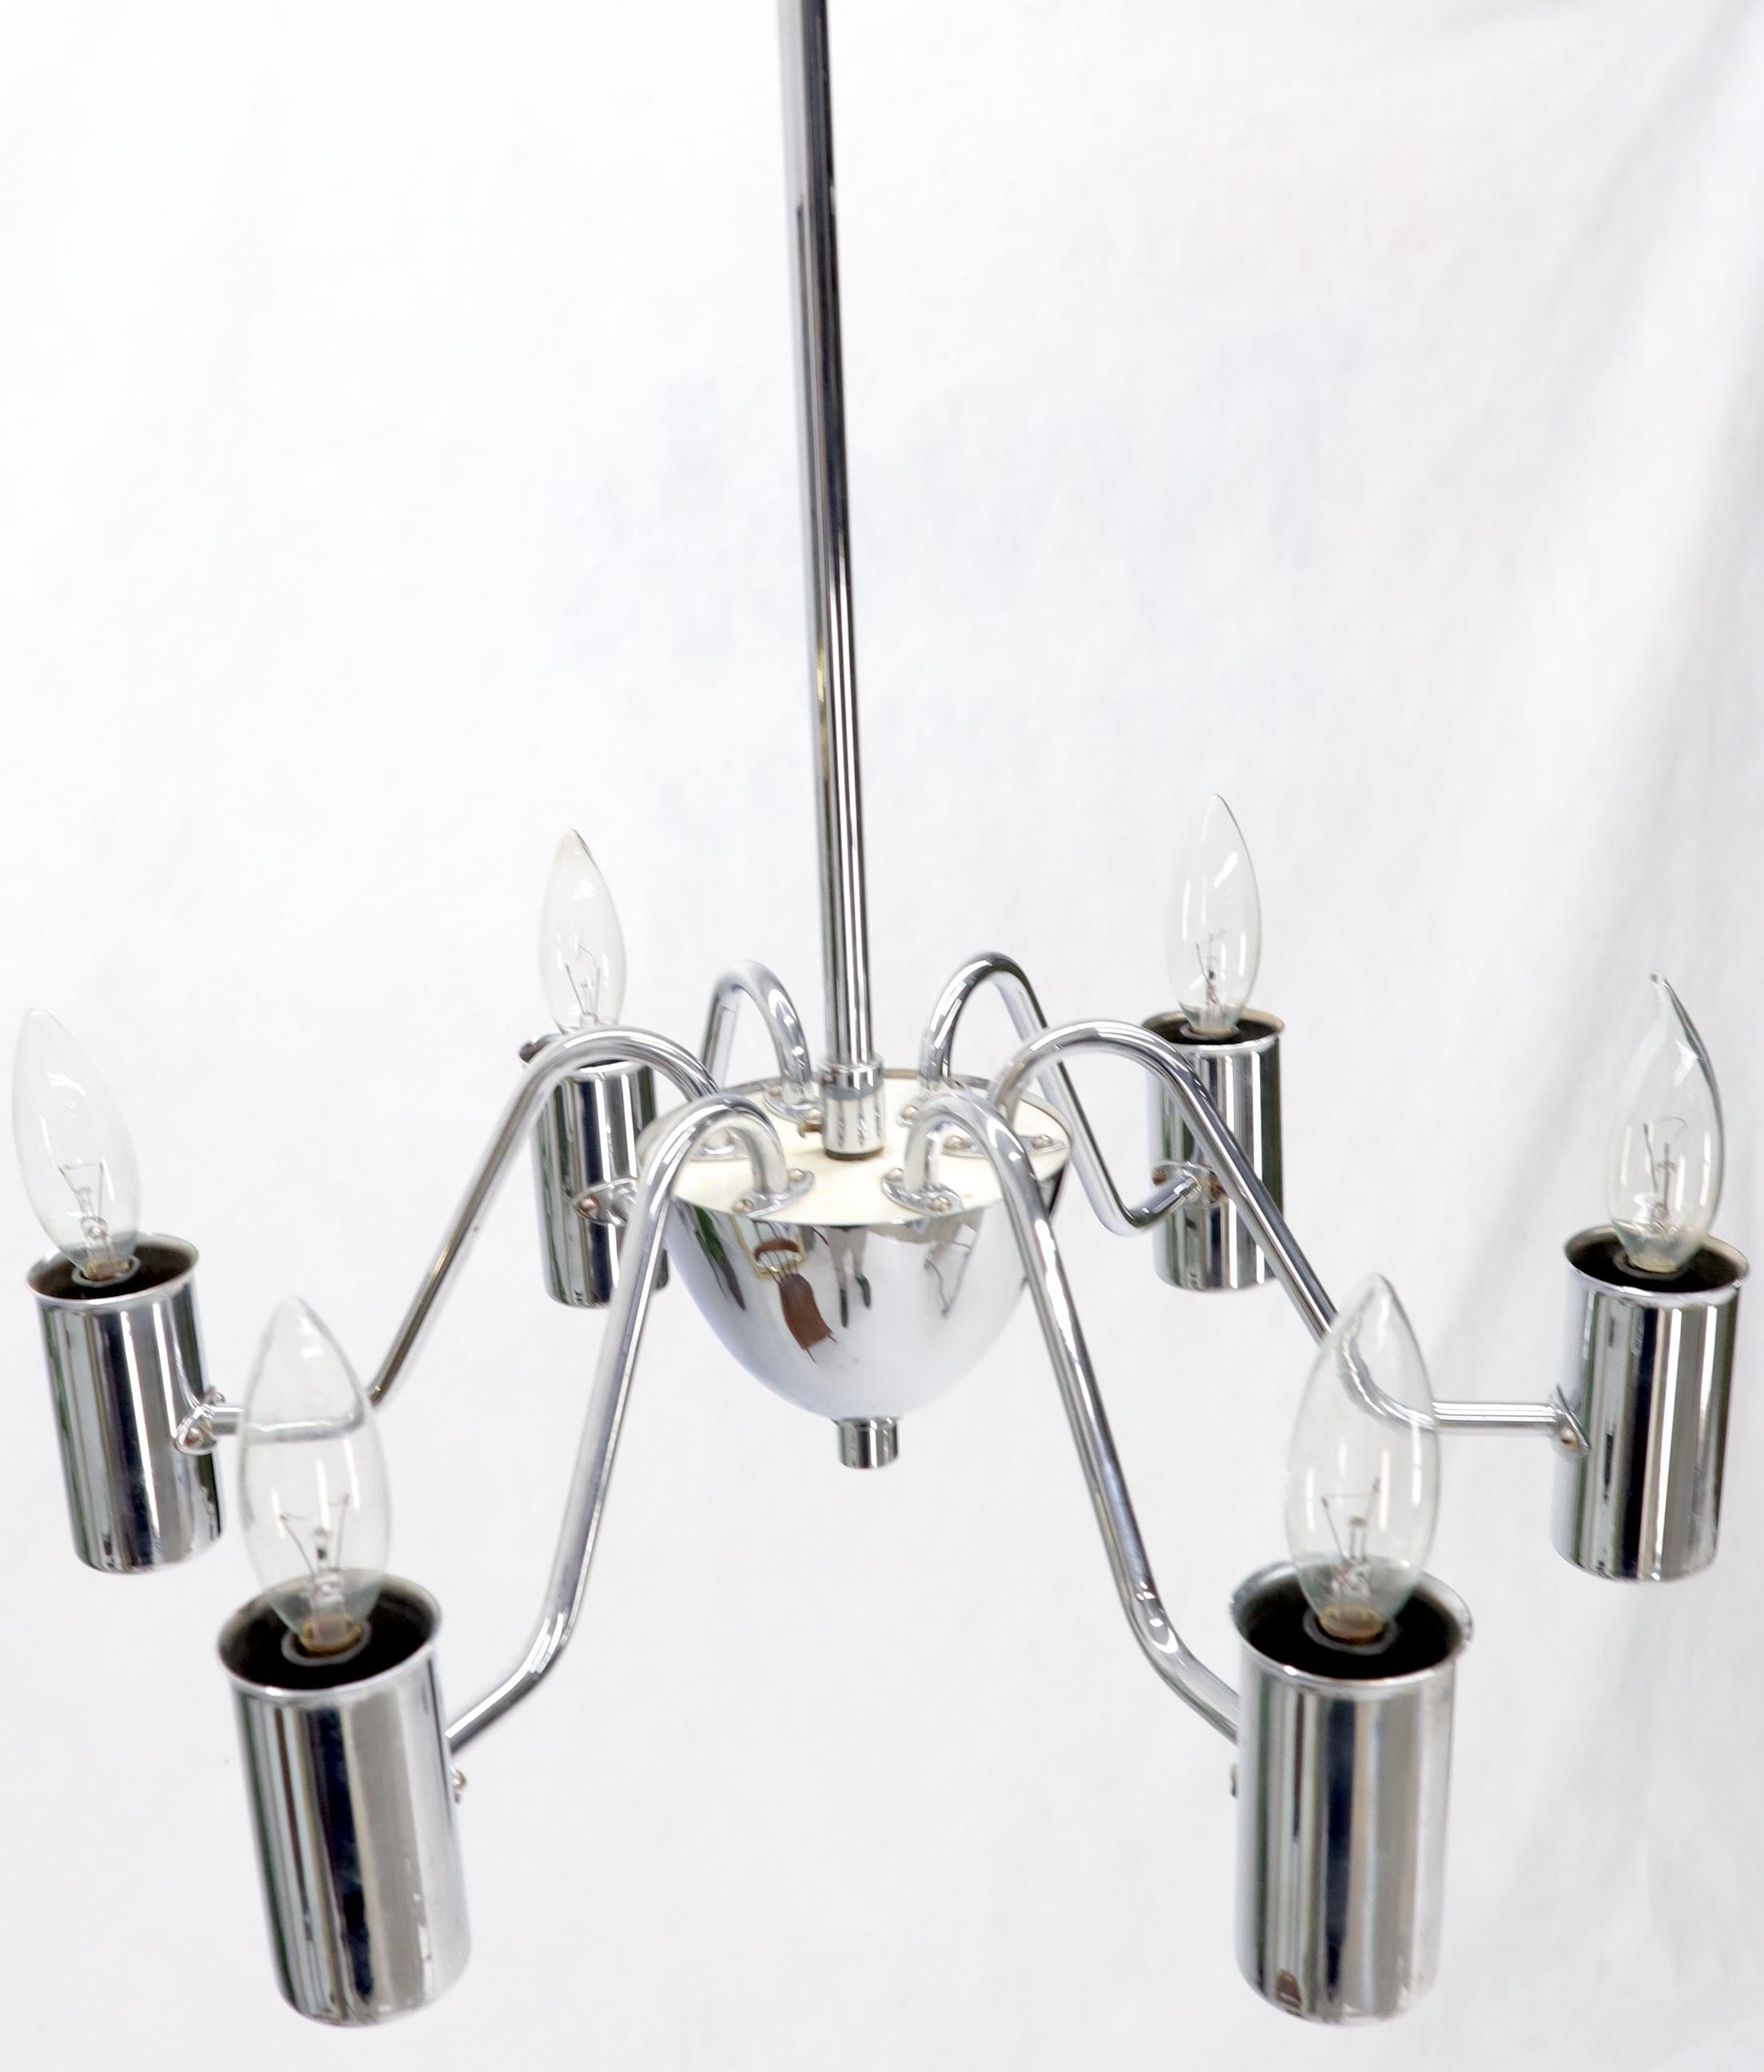 Mid-Century Modern Swedish Chrome-Plated Light Fixture Chandelier In Good Condition For Sale In Rockaway, NJ